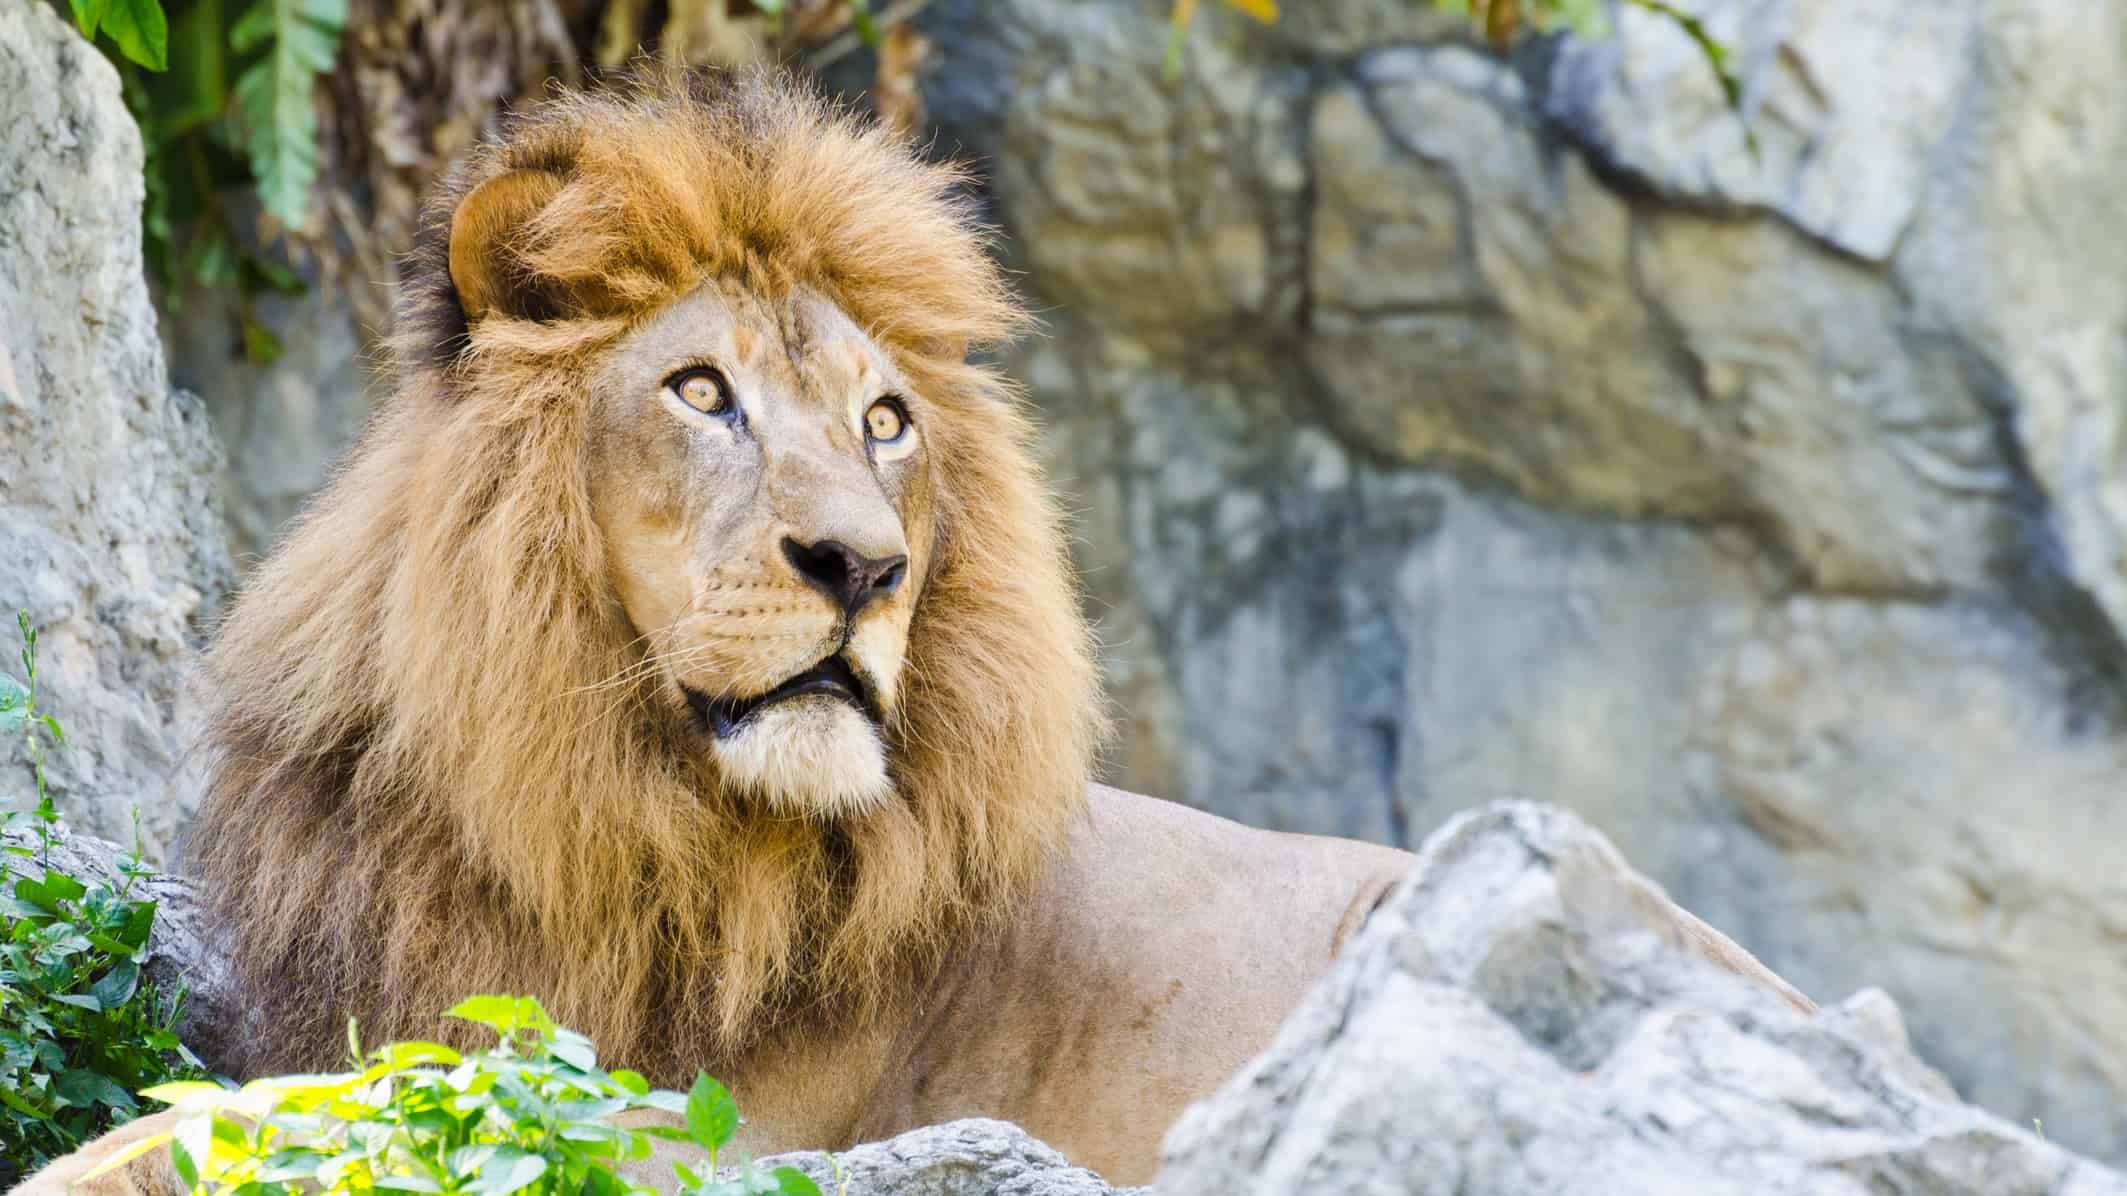 a male lion with a large mane sits atop a rocky mountain outcrop surveying the view.